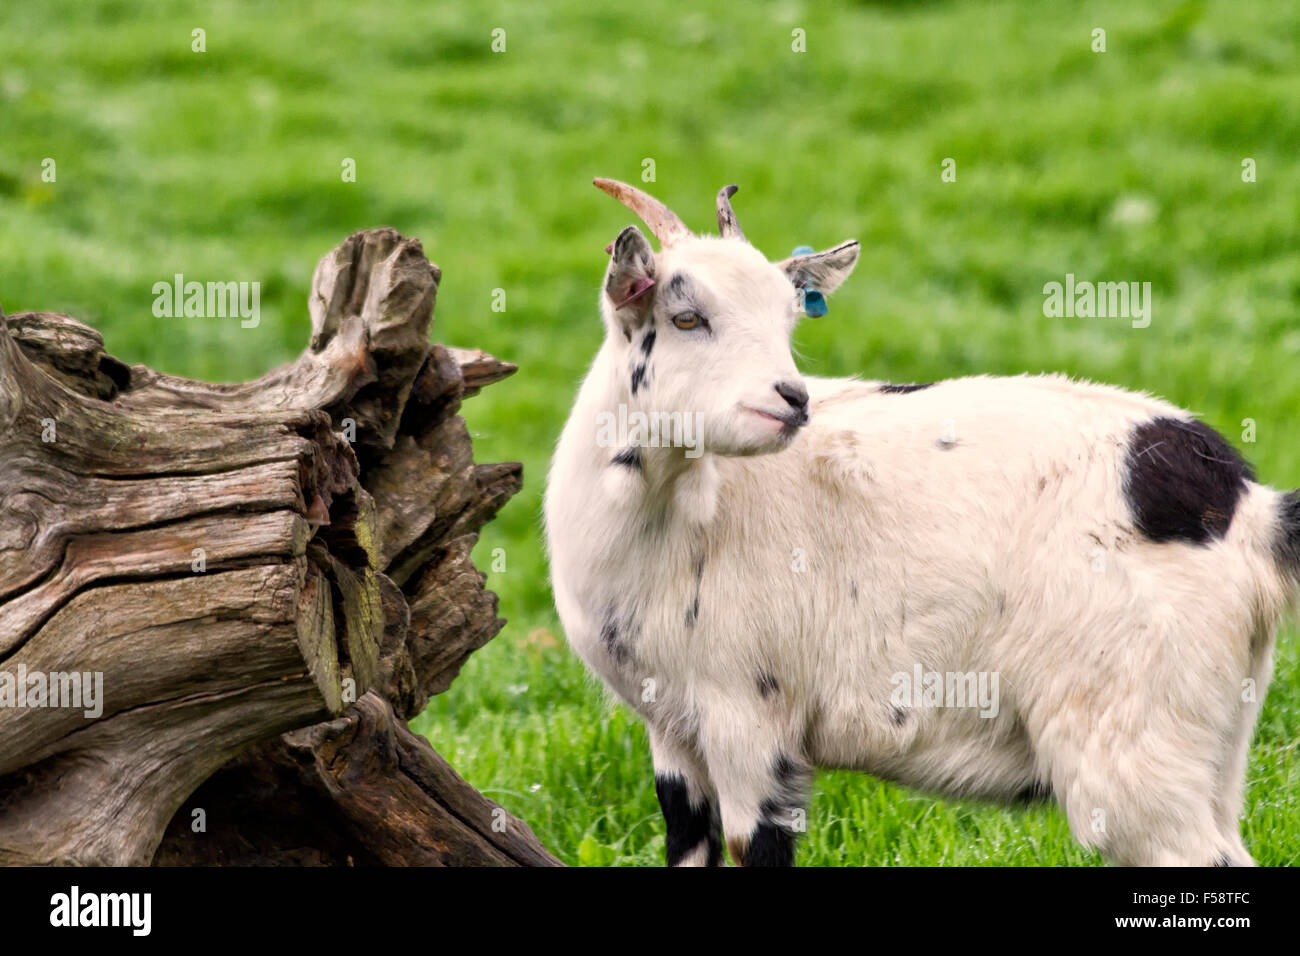 Goat by a tree trunk in a field Stock Photo